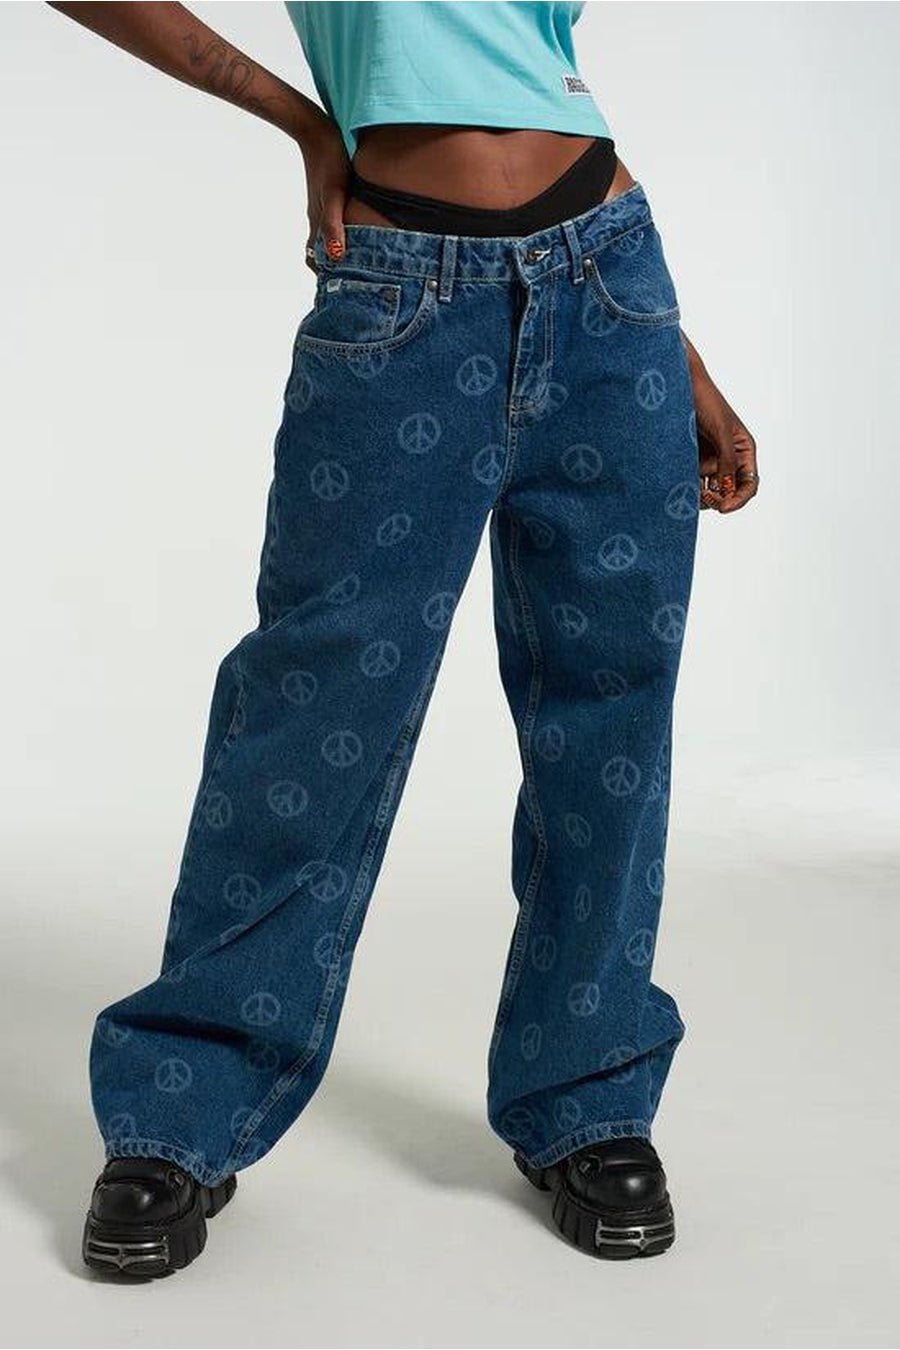 Buy The Ragged Priest Yin Yang Printed Hope Release Jeans at Spoiled Brat  Online - UK online Fashion &amp; lifestyle boutique